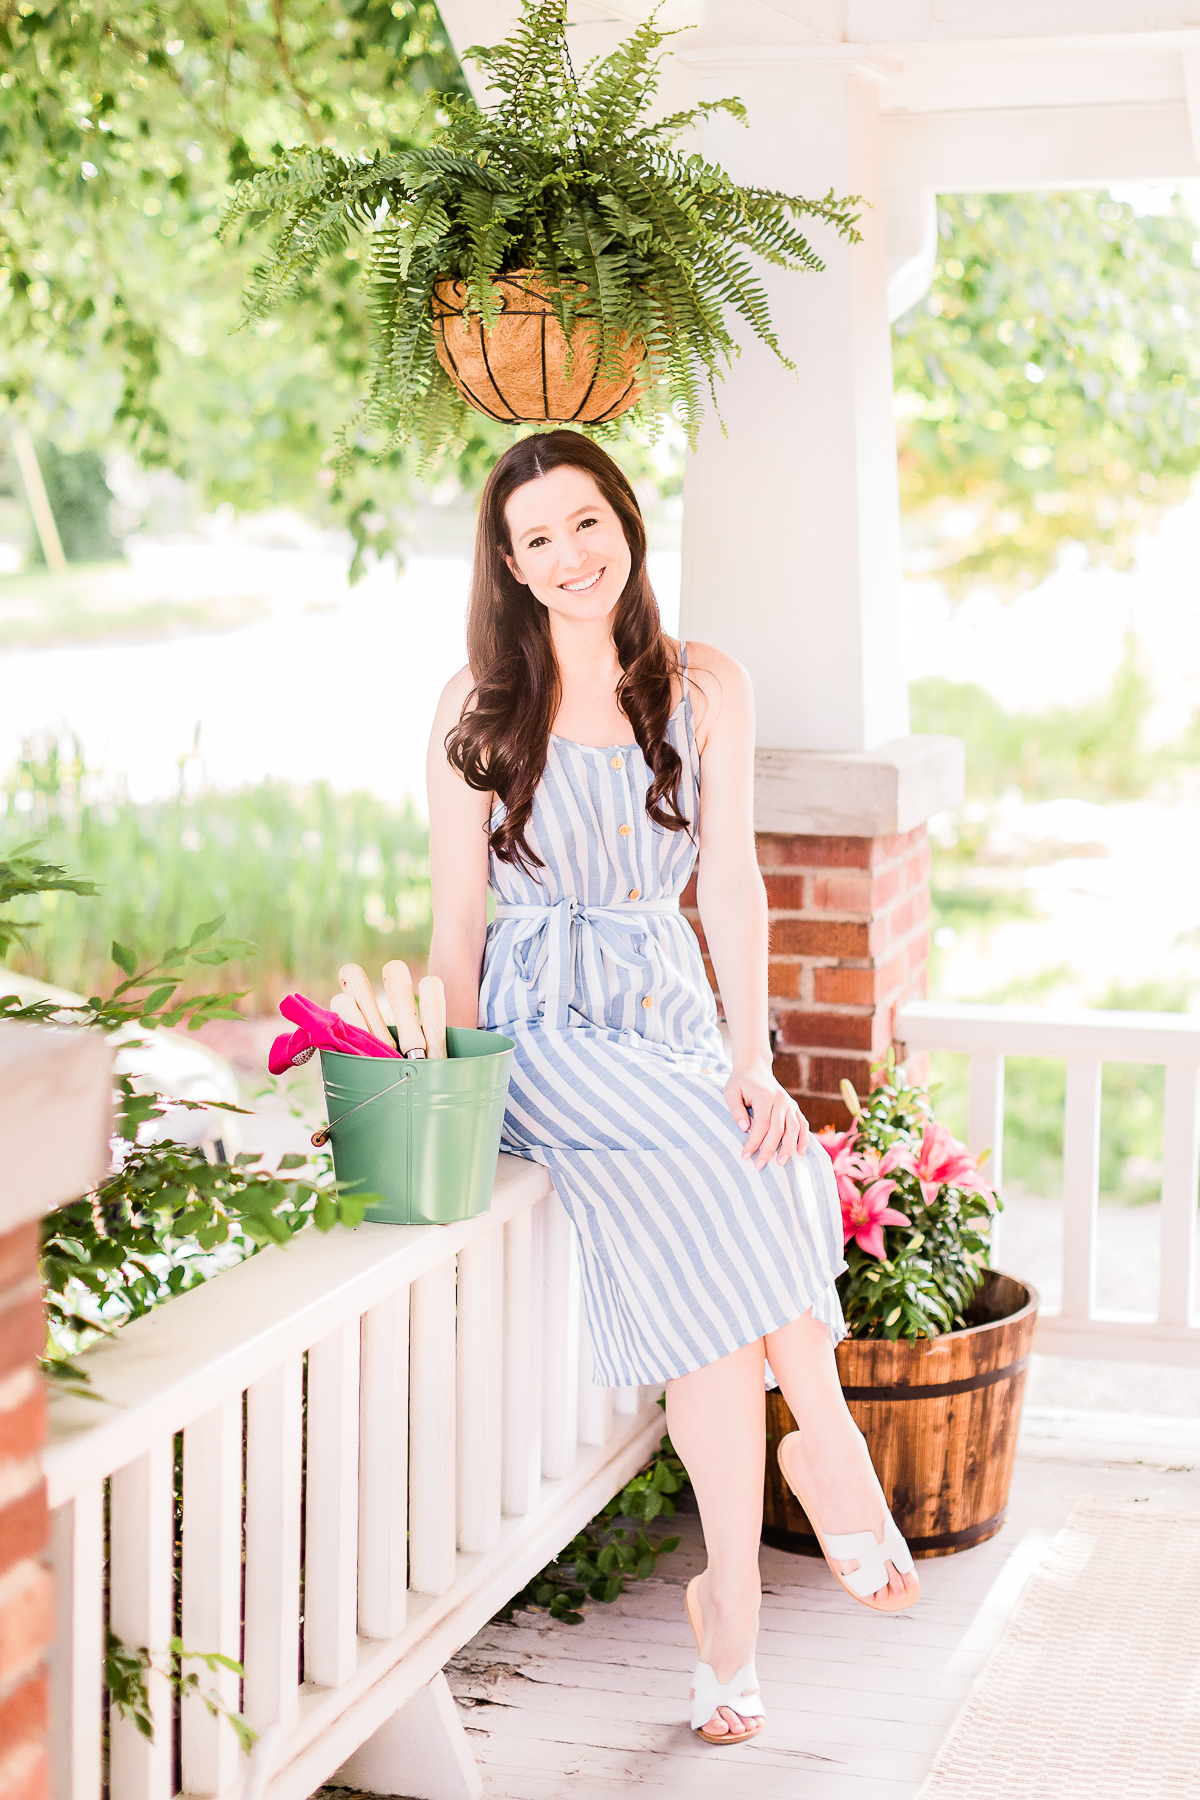 Best Gardening Finds on Amazon by southern lifestyle blogger Stephanie Ziajka from Diary of a Debutante